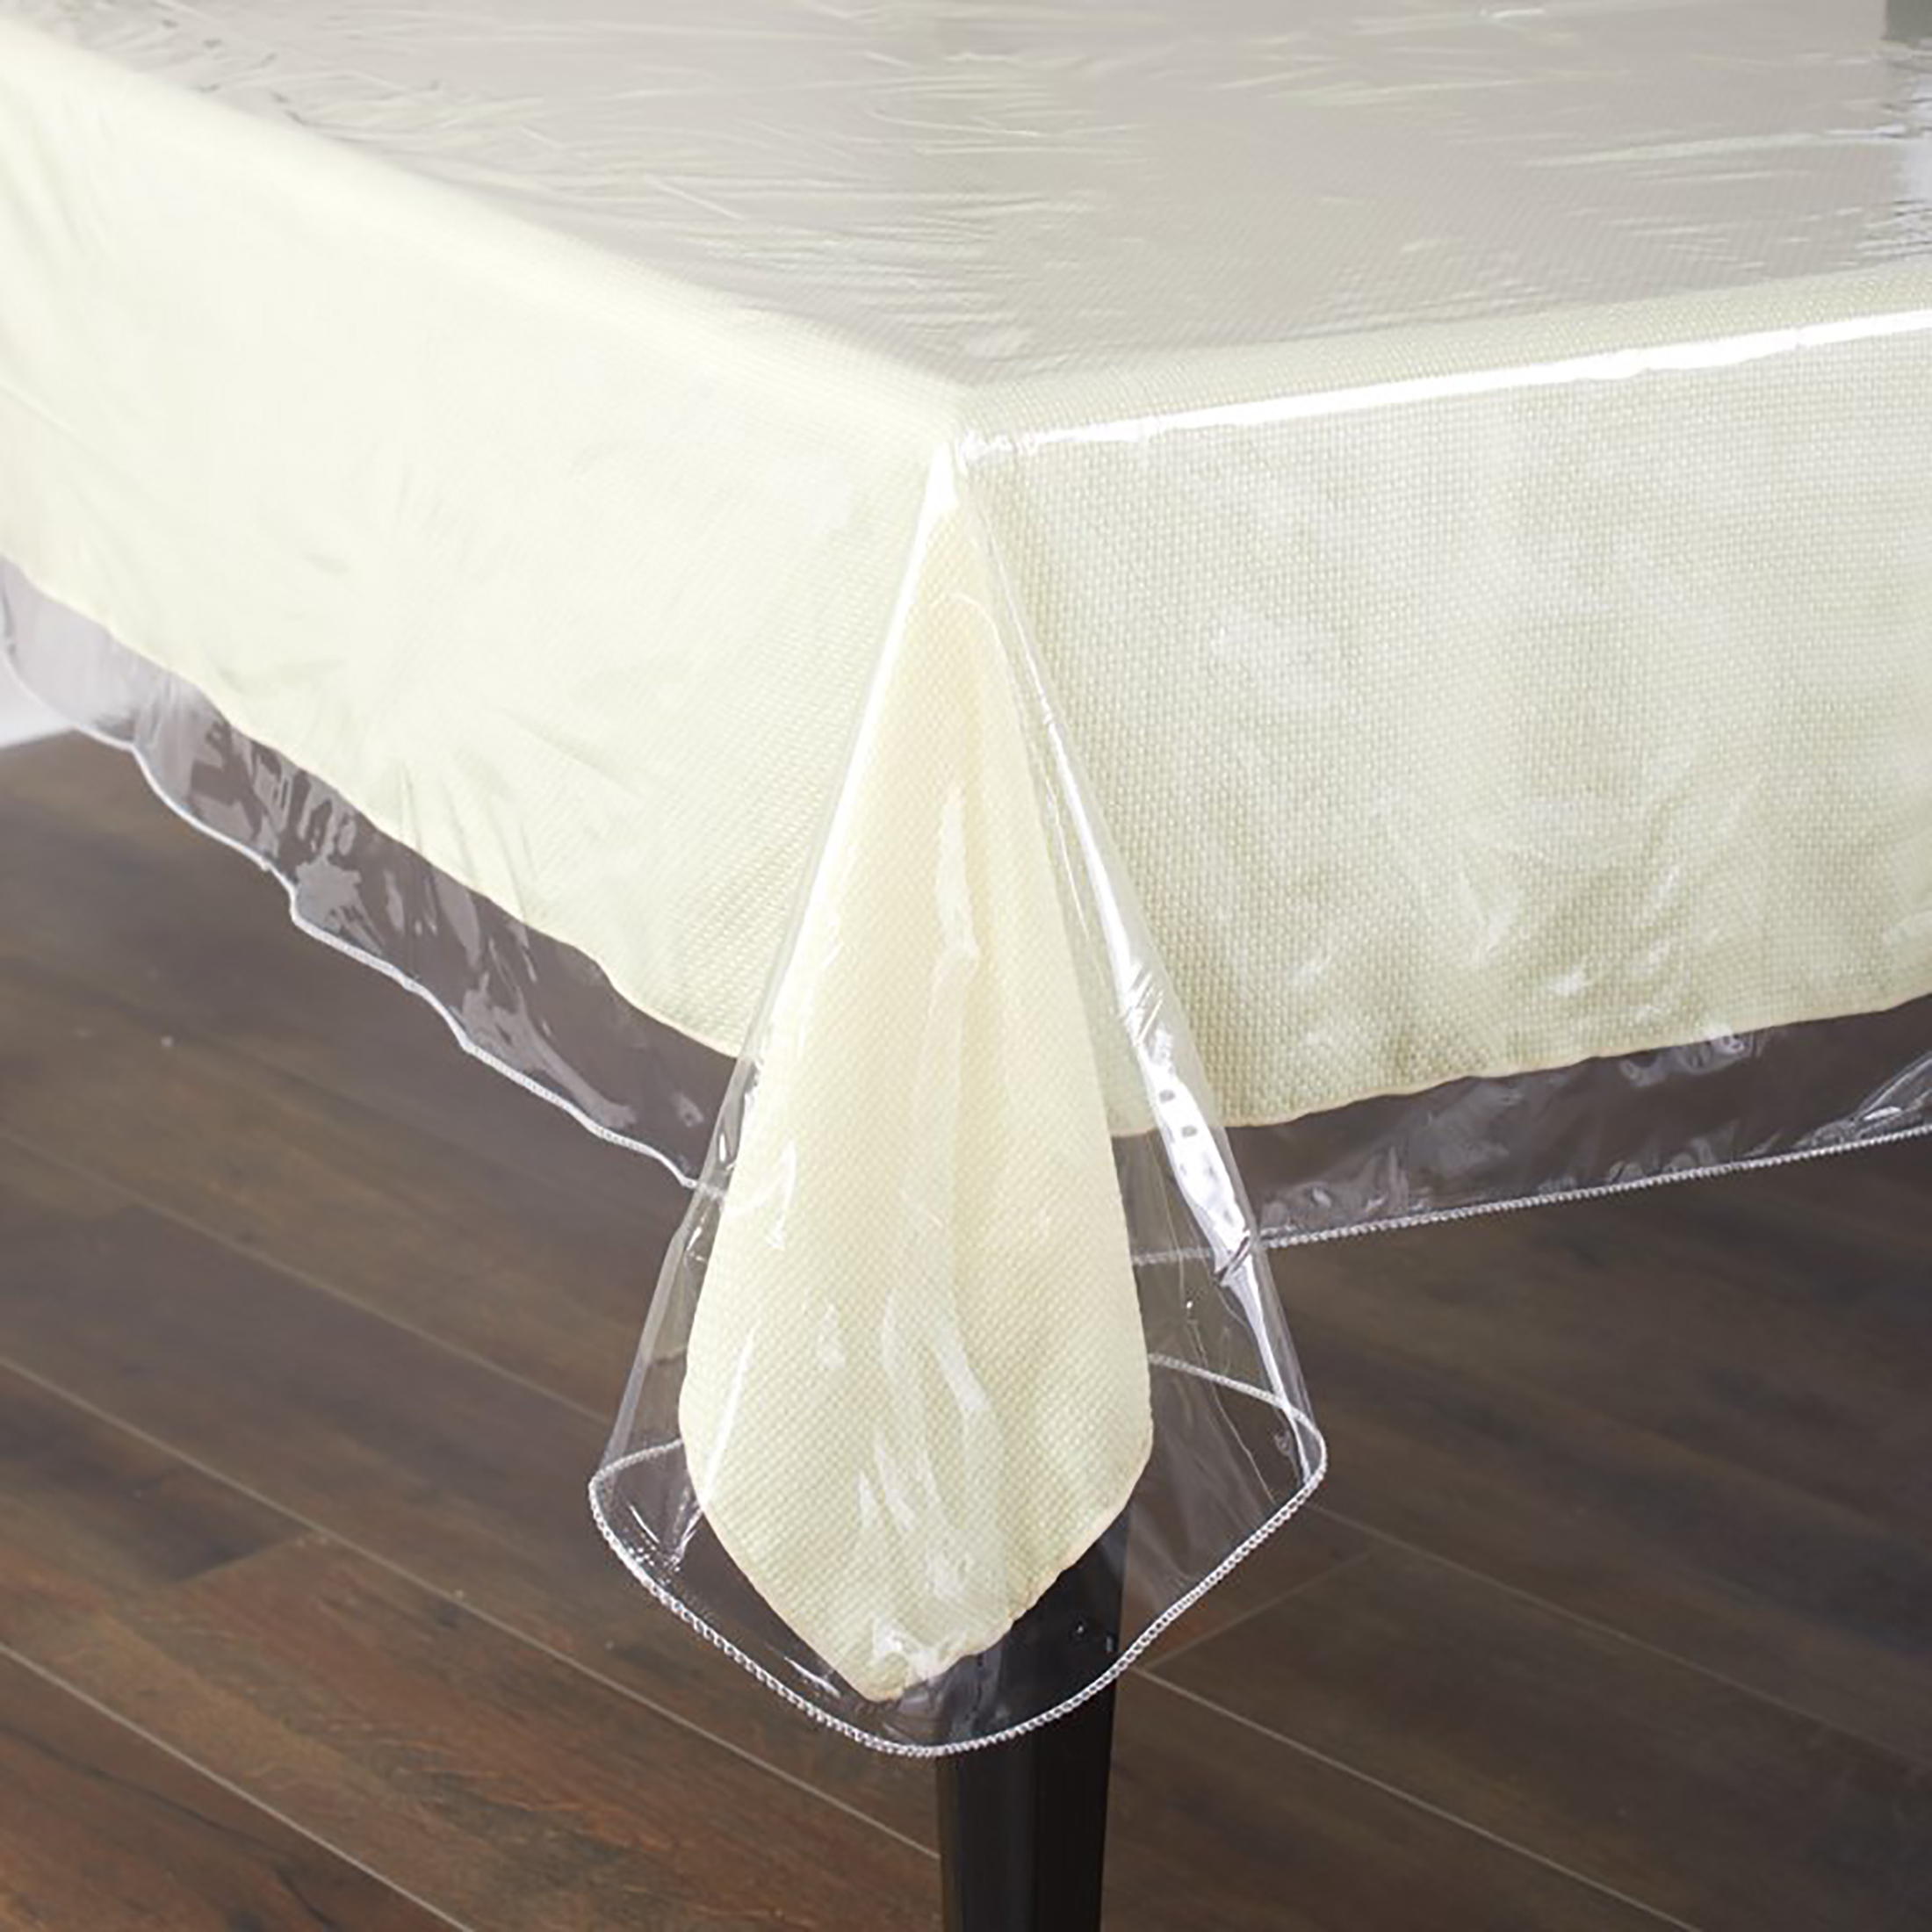 Waterproof Window Clear Vinyl Tablecloth Protector Oblong - 60x108